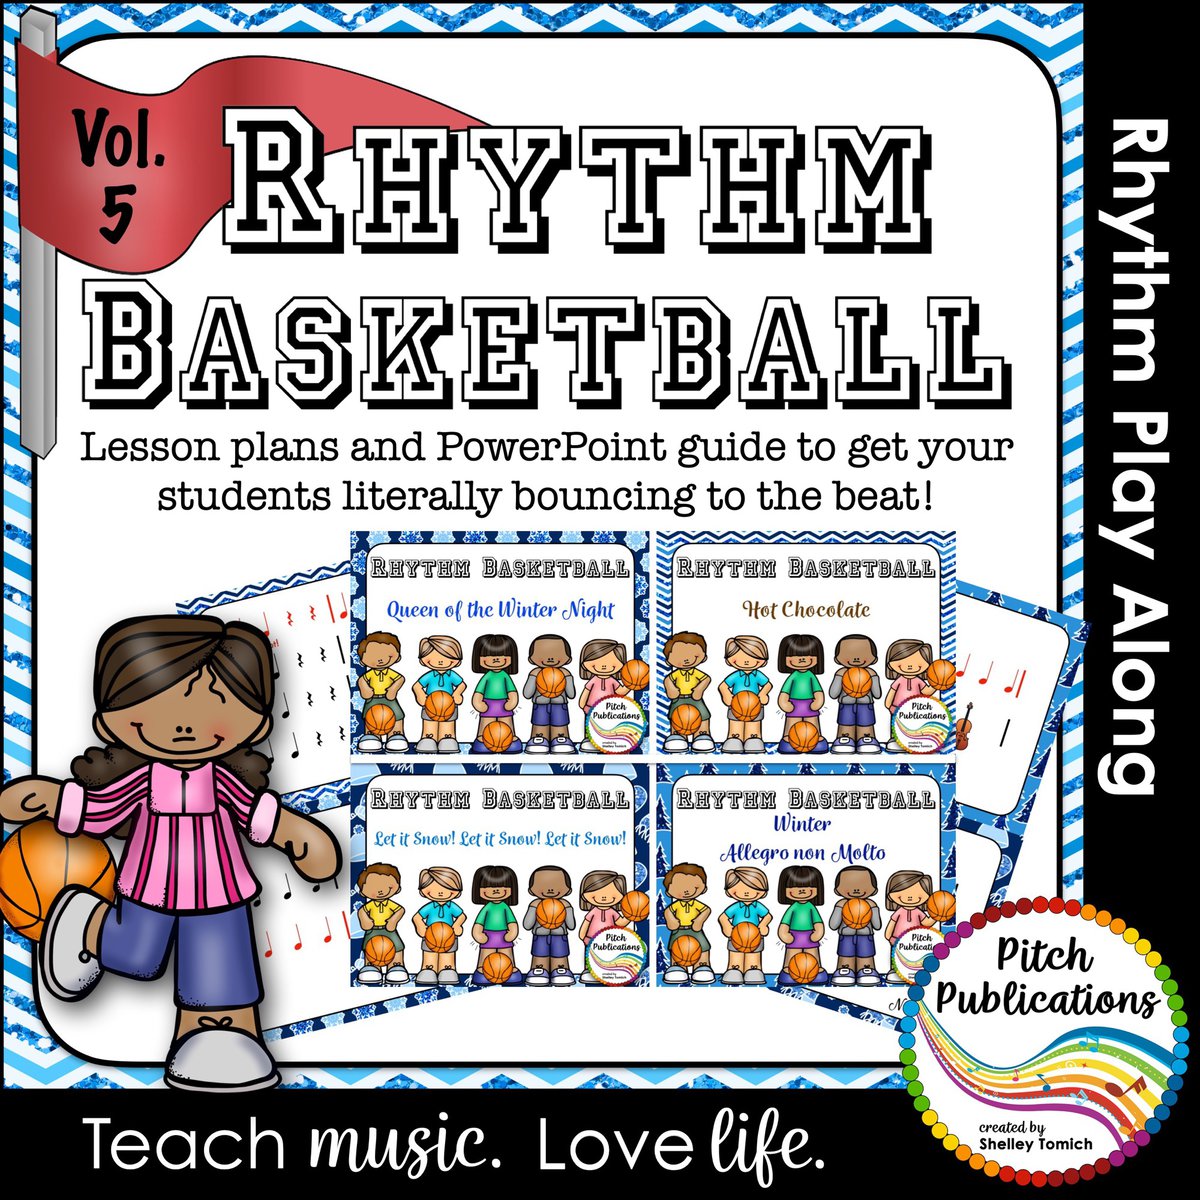 The words Rhythm Basketball in athletic jersey letters. Underneath are slide examples with song titles including Queen of the Winter Night, Hot Chocolate, Let it Snow, and Winter - Allegro non Molto. Image of small child with basketball.